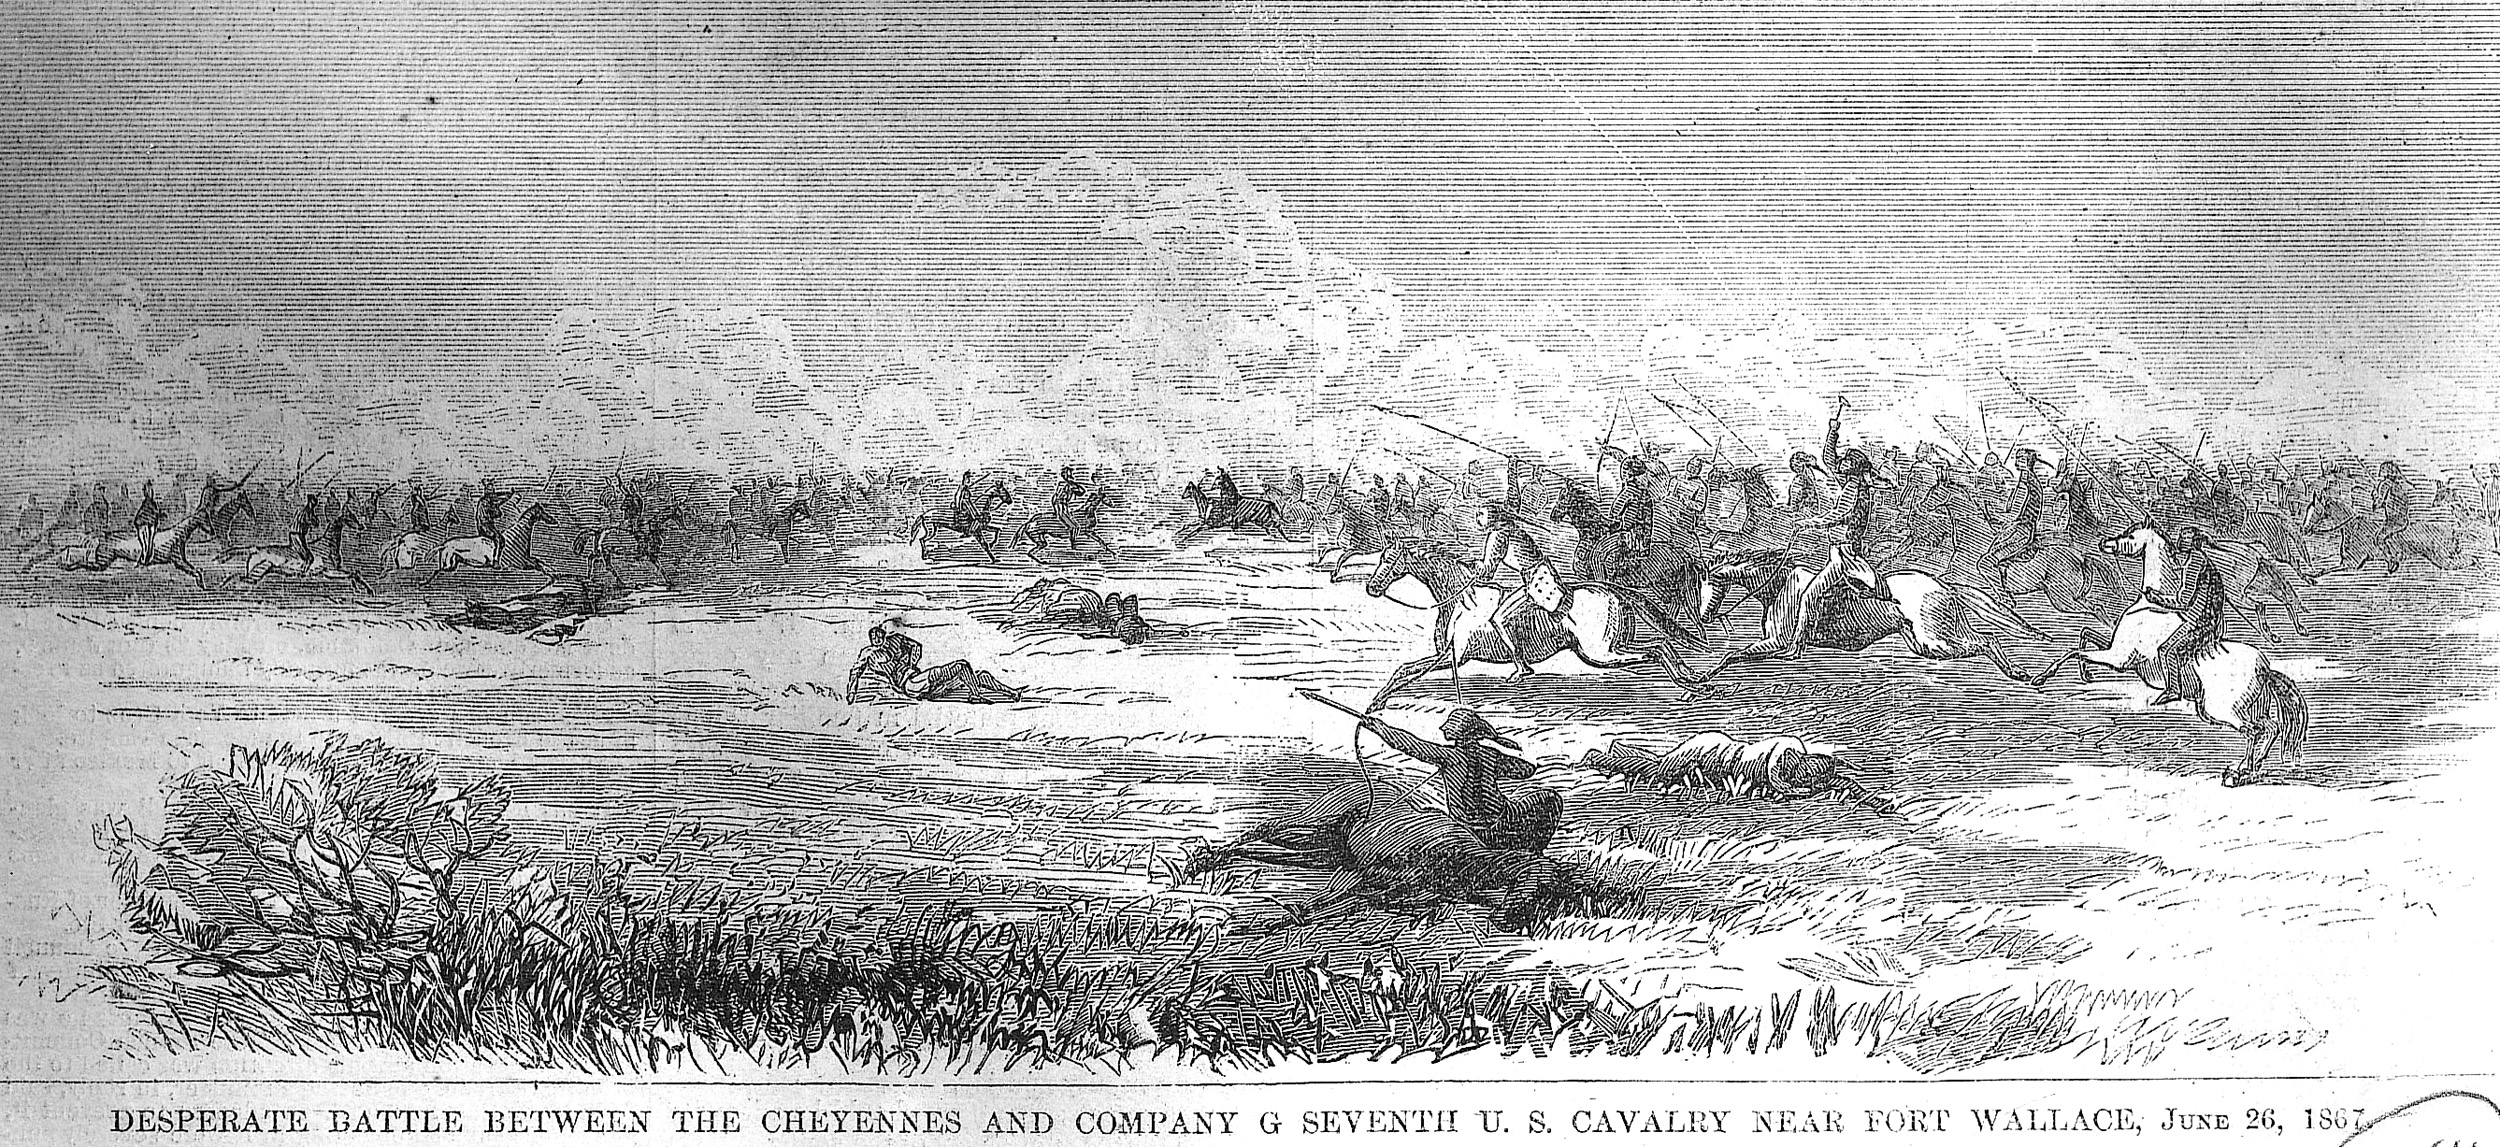 Indians and cavalry troopers advance toward each other in this rendition of the Fort Wallace fight published in Harper’s Weekly a month after the battle.